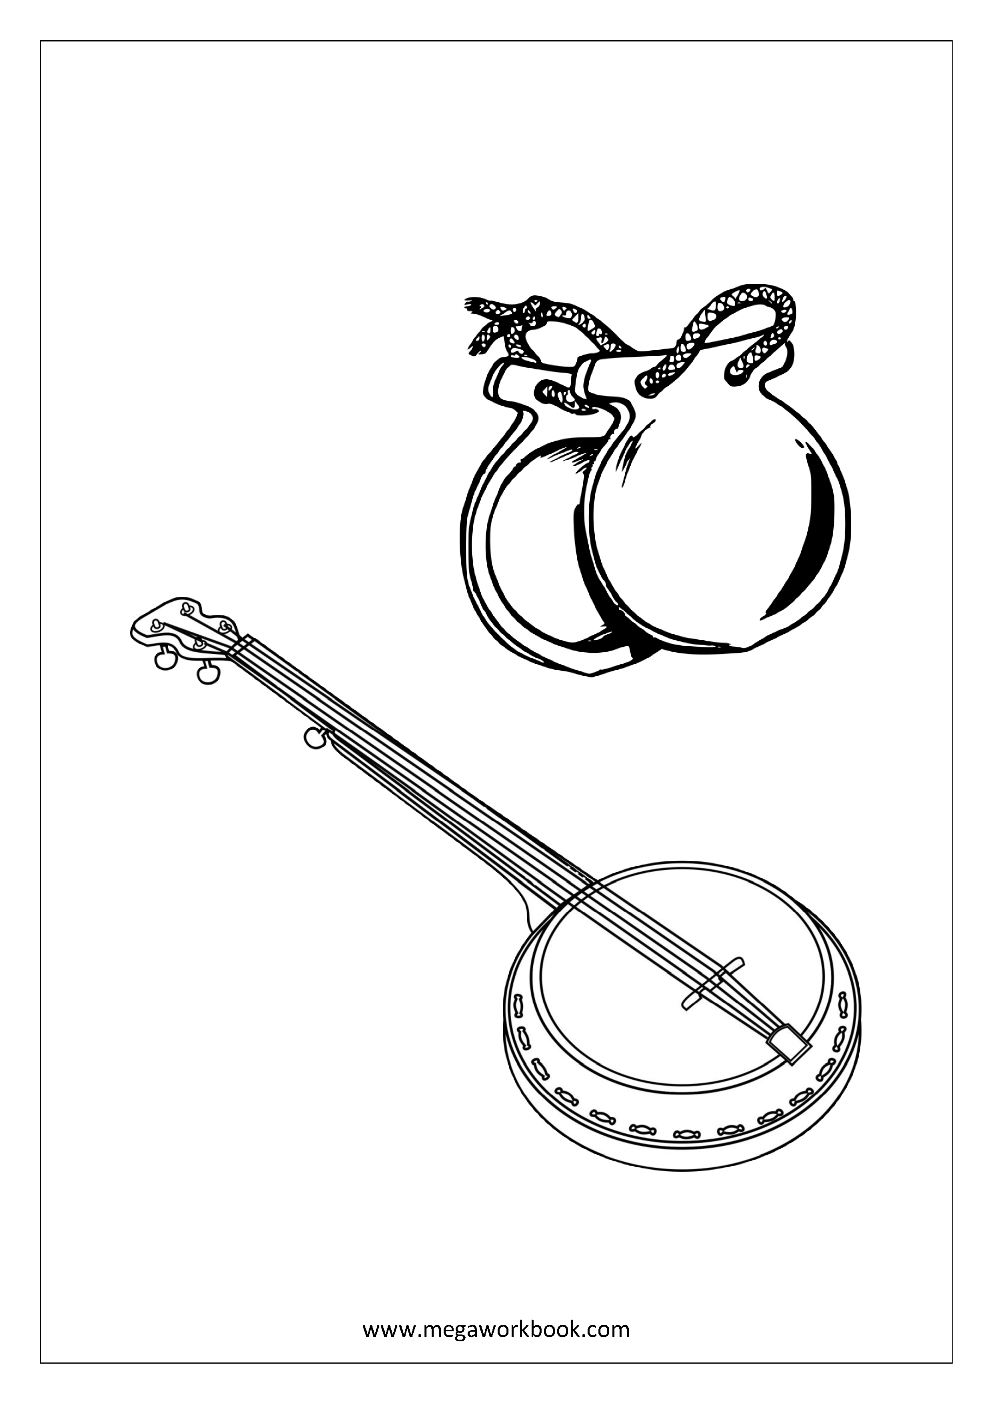 Free Coloring Sheets - Musical Instruments - MegaWorkbook